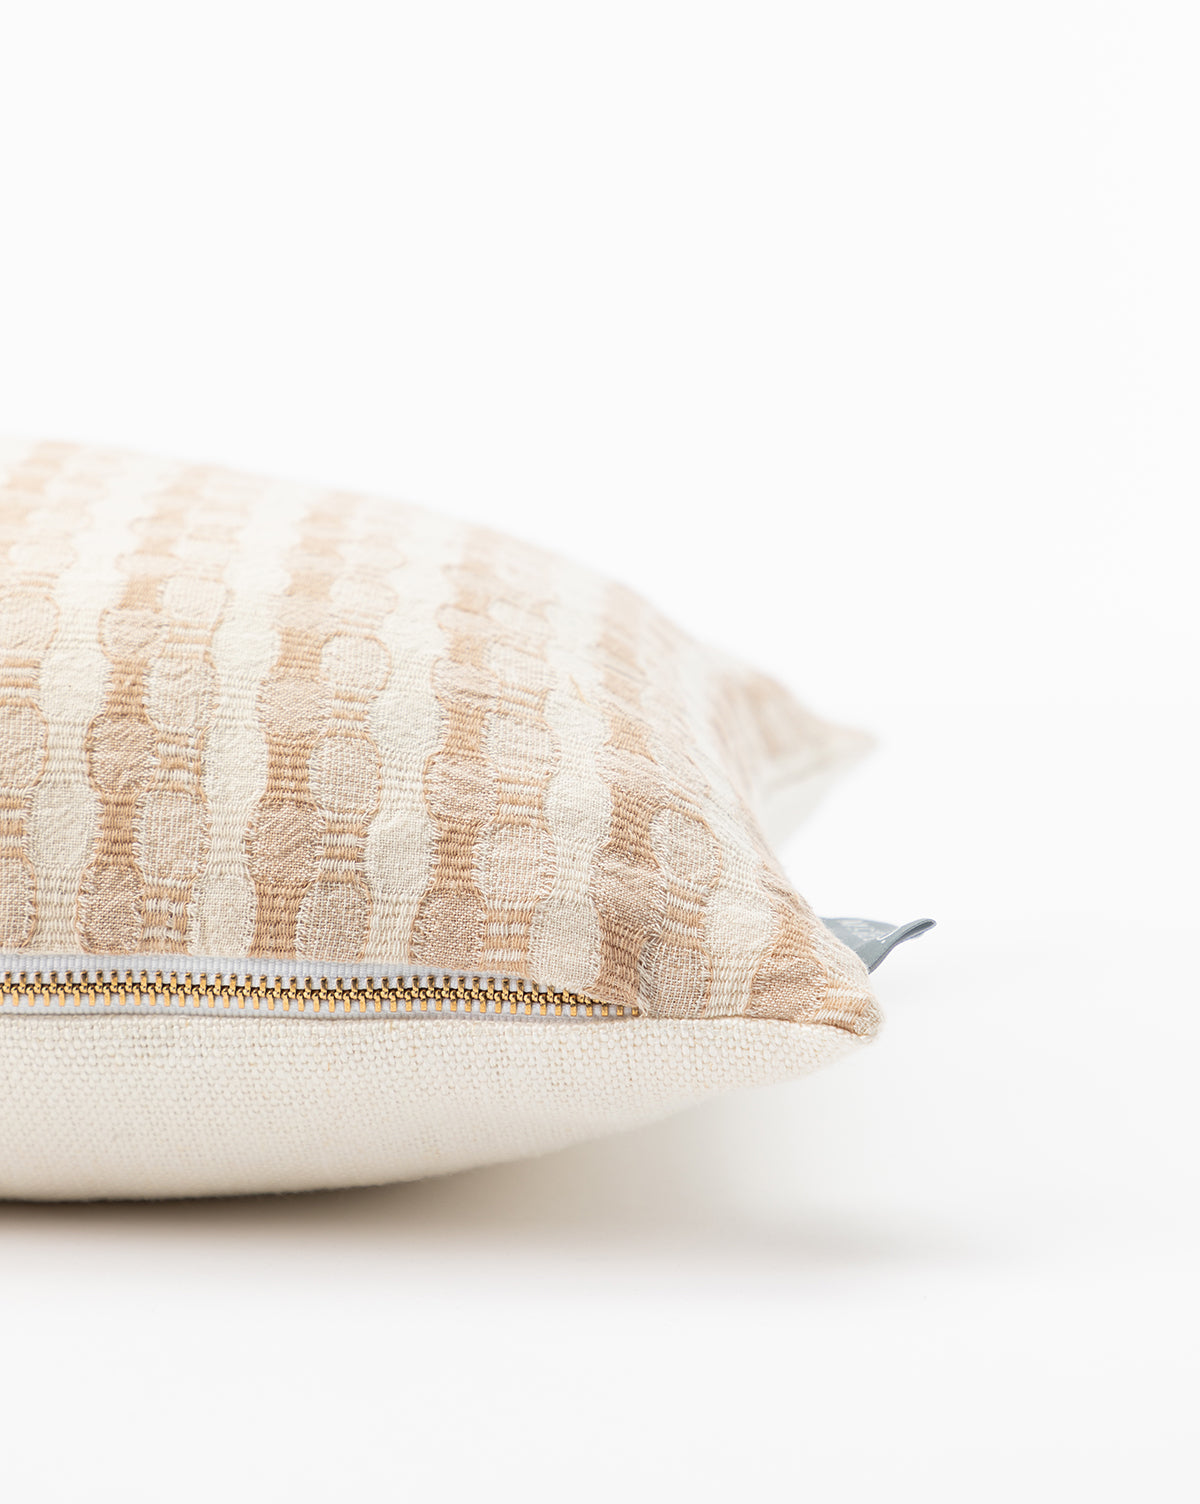 Tangren, Vintage Natural Patterned Pillow Cover No. 1